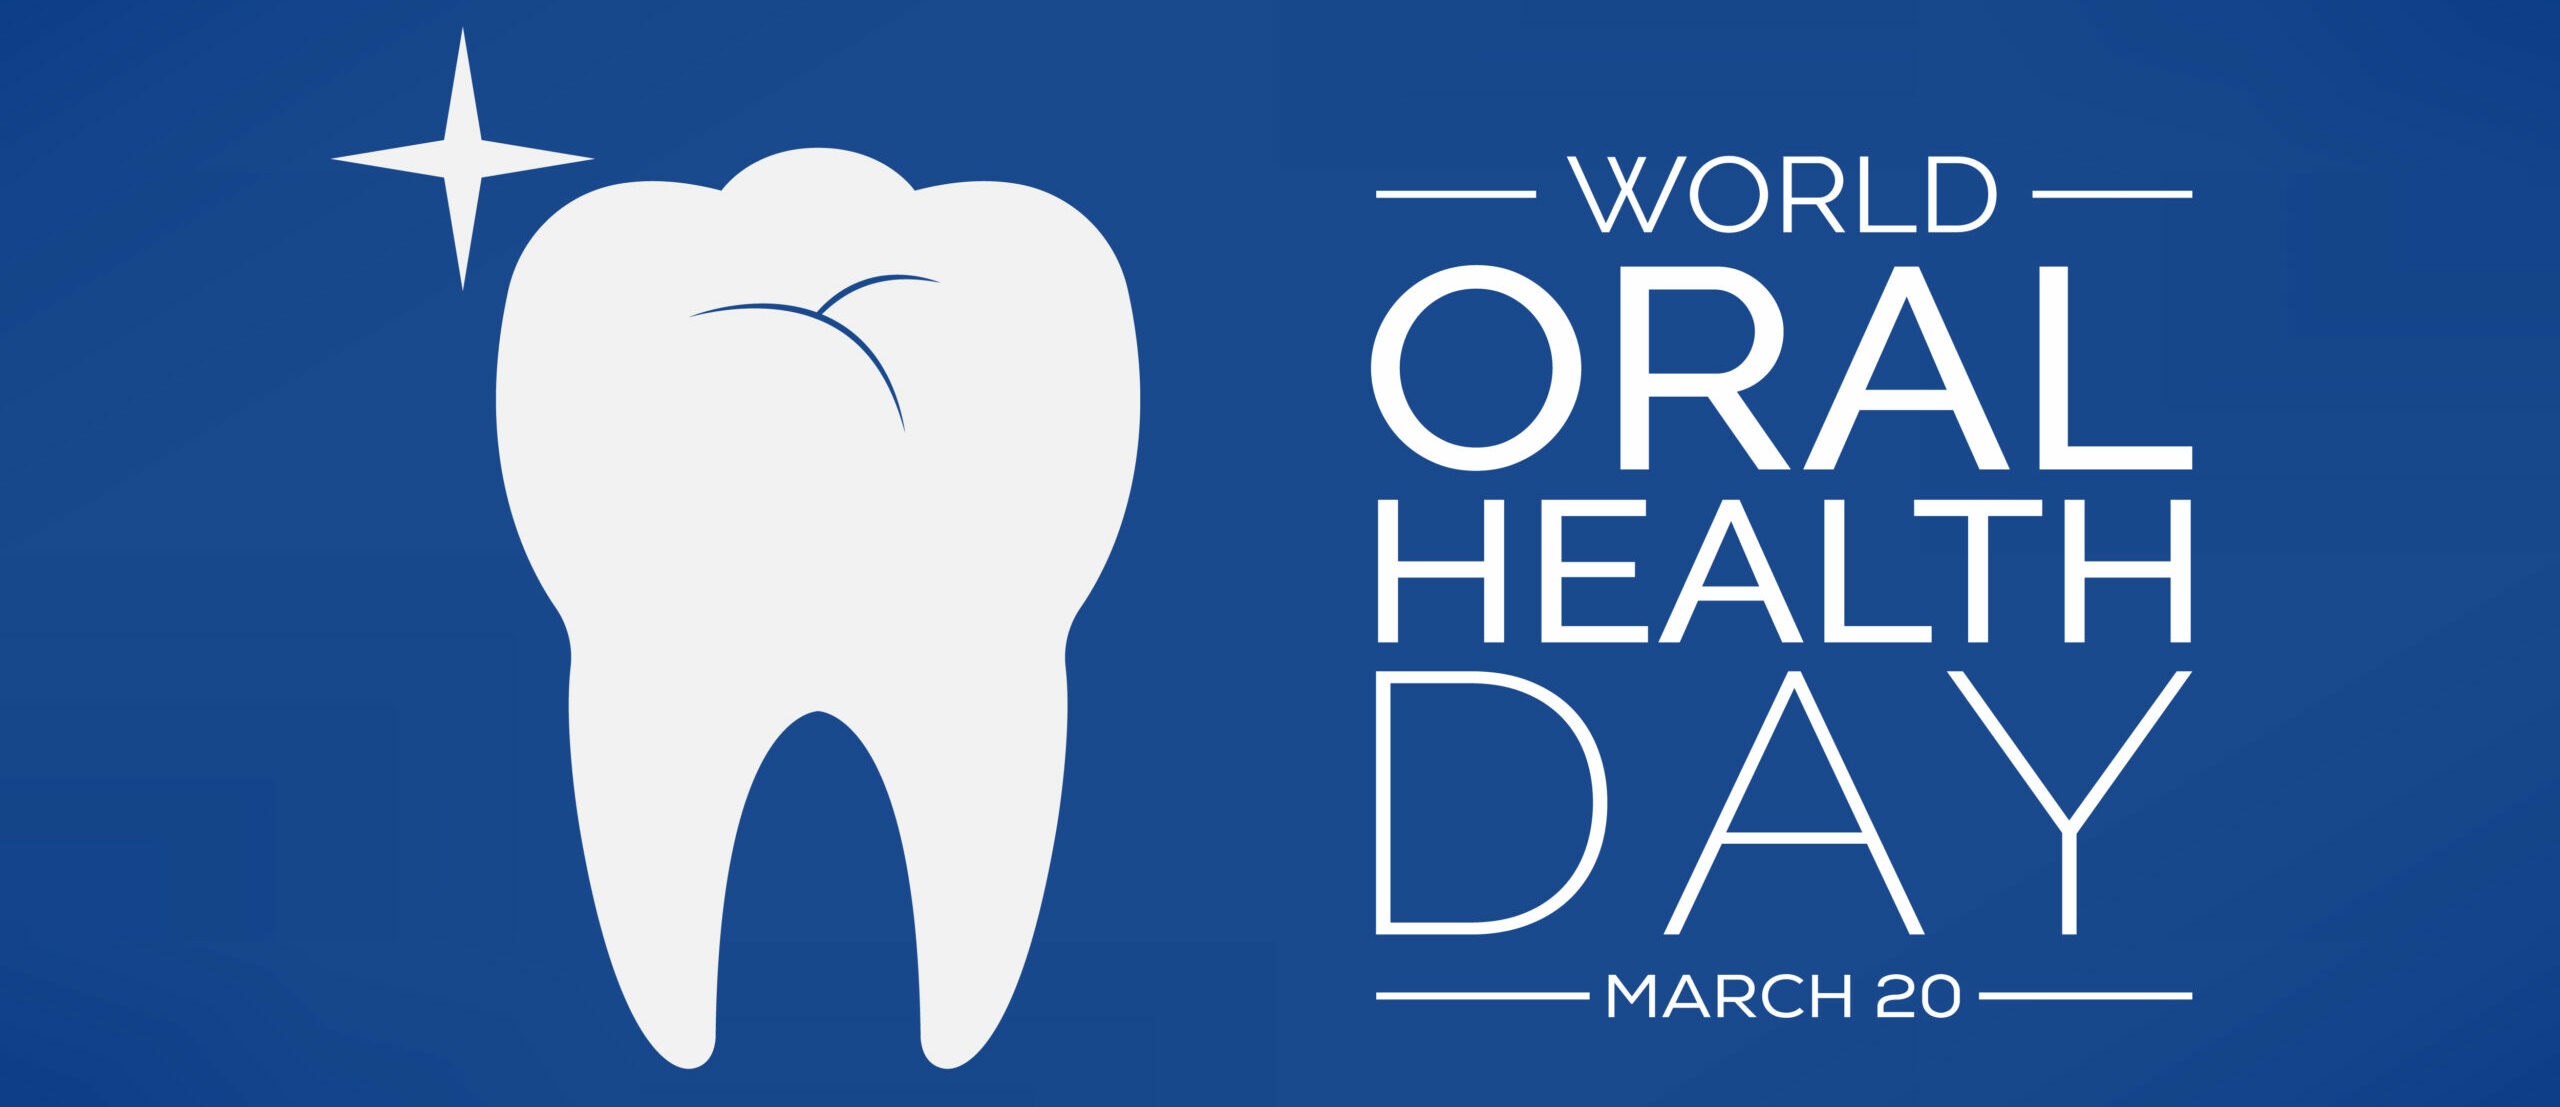 WORLD ORAL HEALTH DAY IN TAMIL